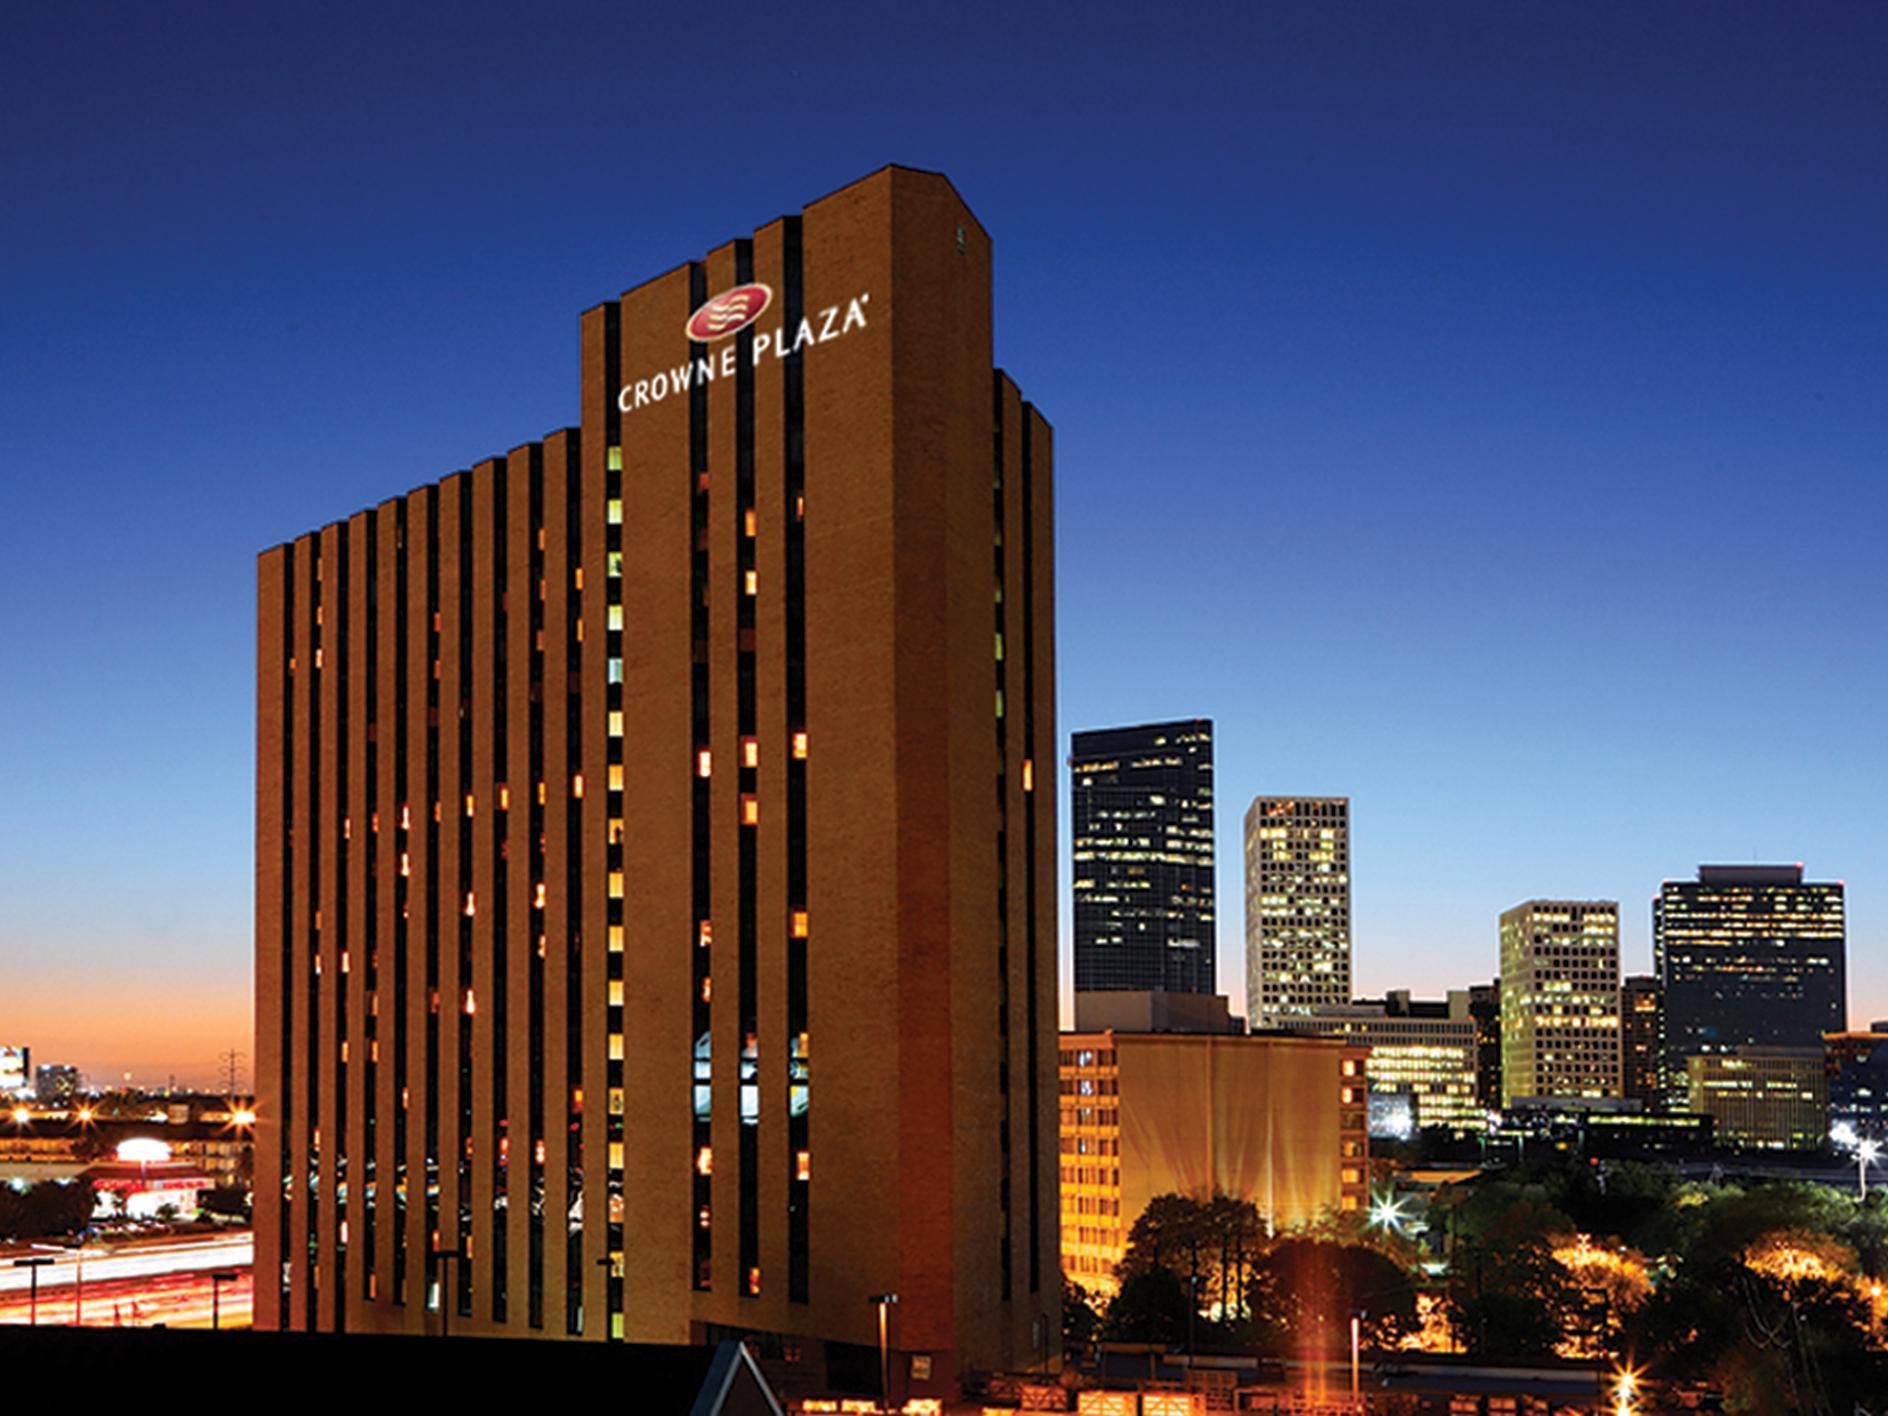 Located in the trendy Greenway/Upper Kirby area, our hotel is a short drive from the world-renowned Texas Medical Center – the largest medical campus in the world. Our hotel offers caring hospitality within minutes of the MD Anderson Medical Center – the world’s largest cancer hospital – and the Texas Children's Hospital.